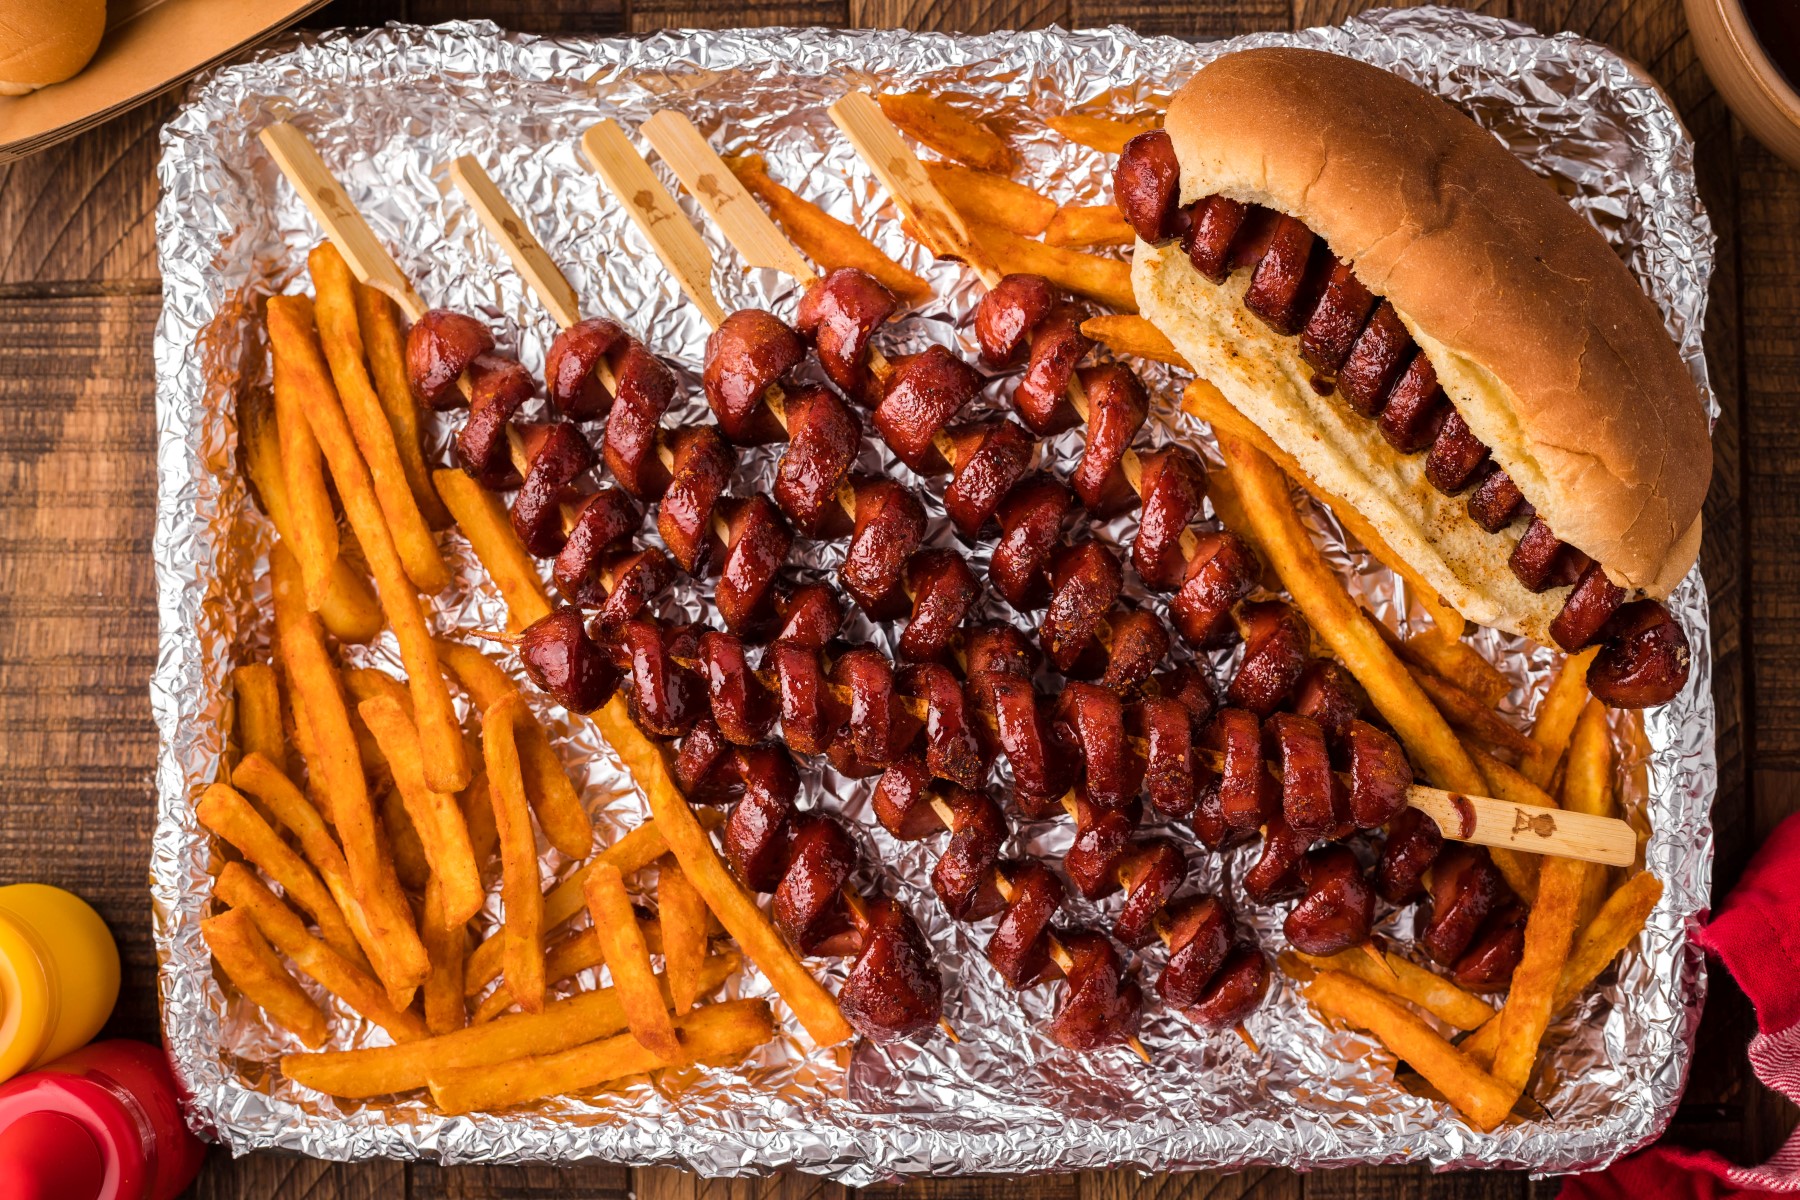 Smoked hot dogs on a foil lined tray with fires and a smoked hot dog in a toasted bun.